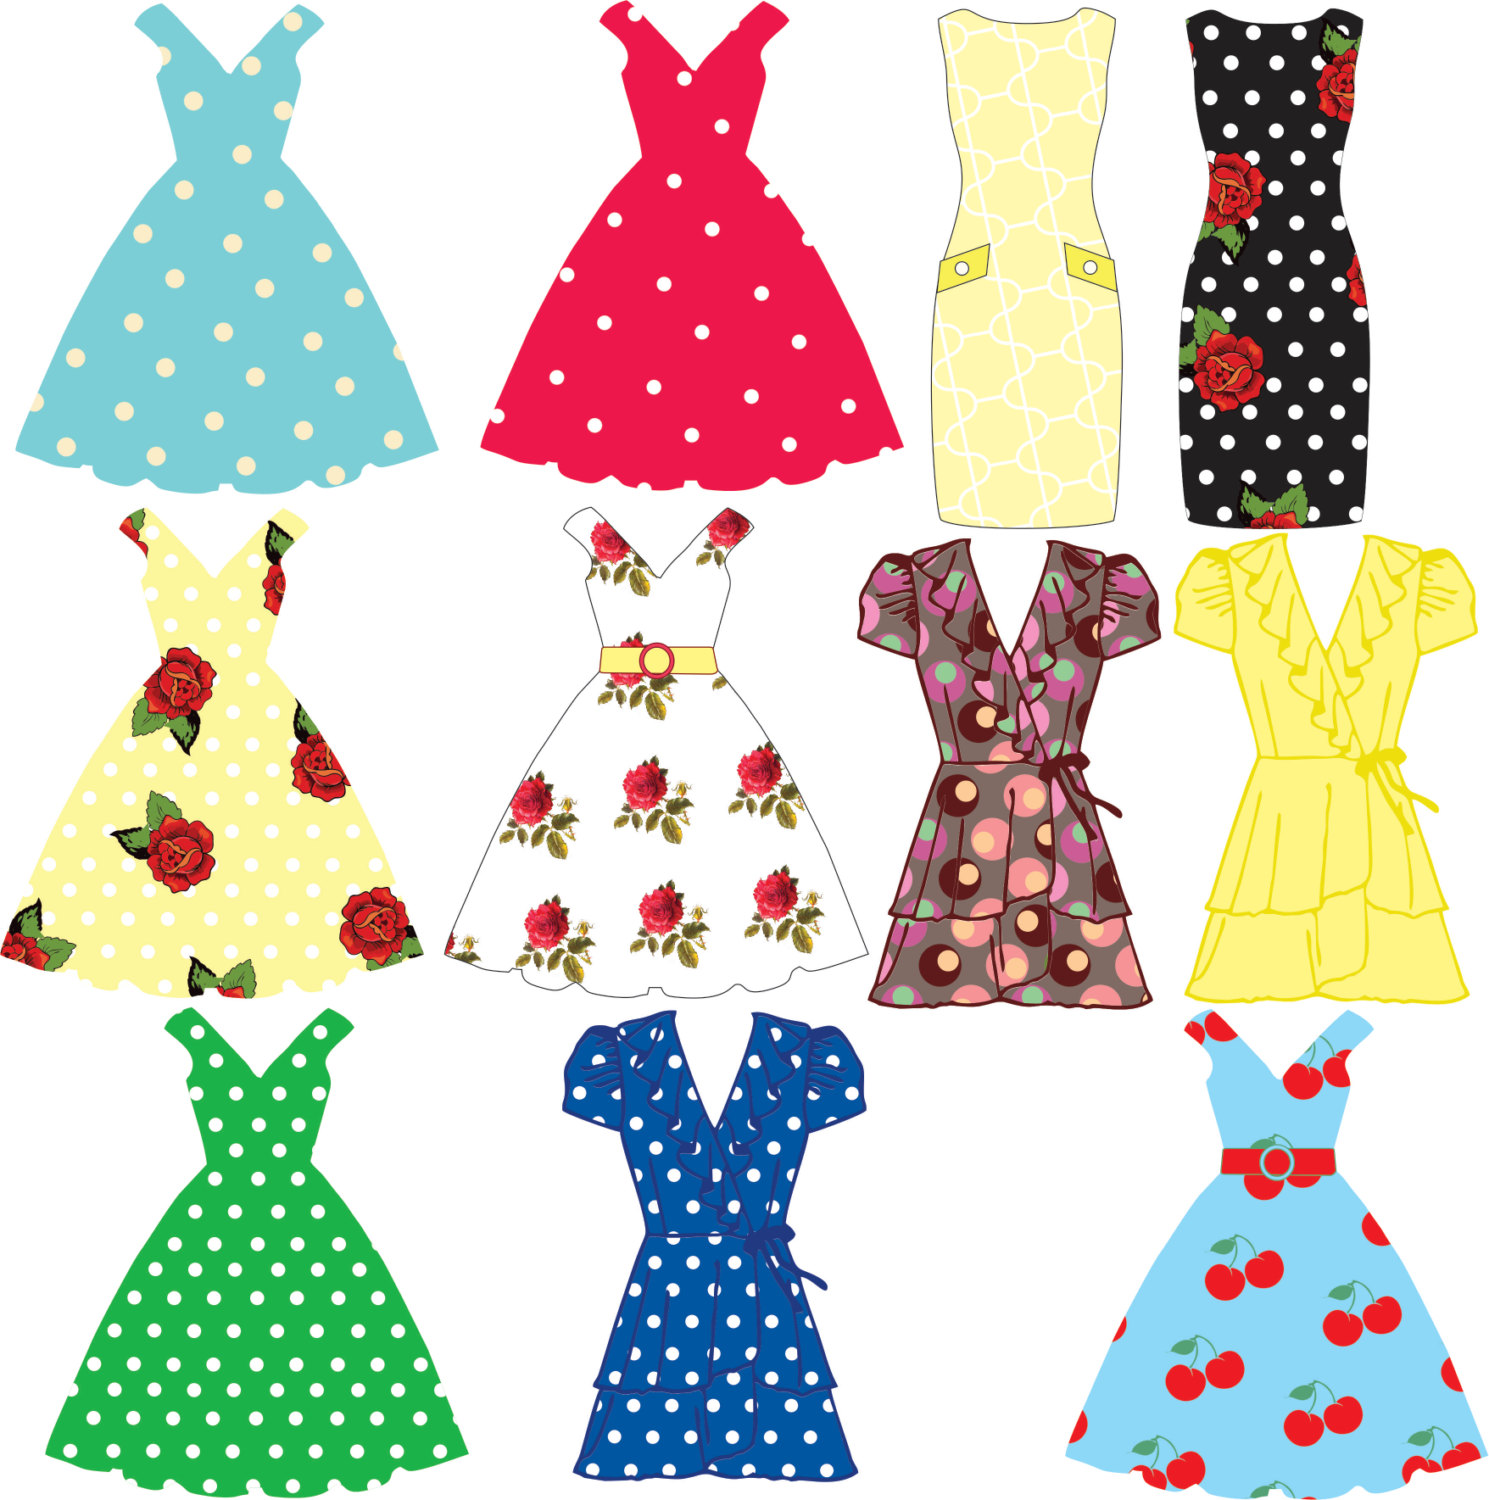 Dress clipart #6, Download drawings